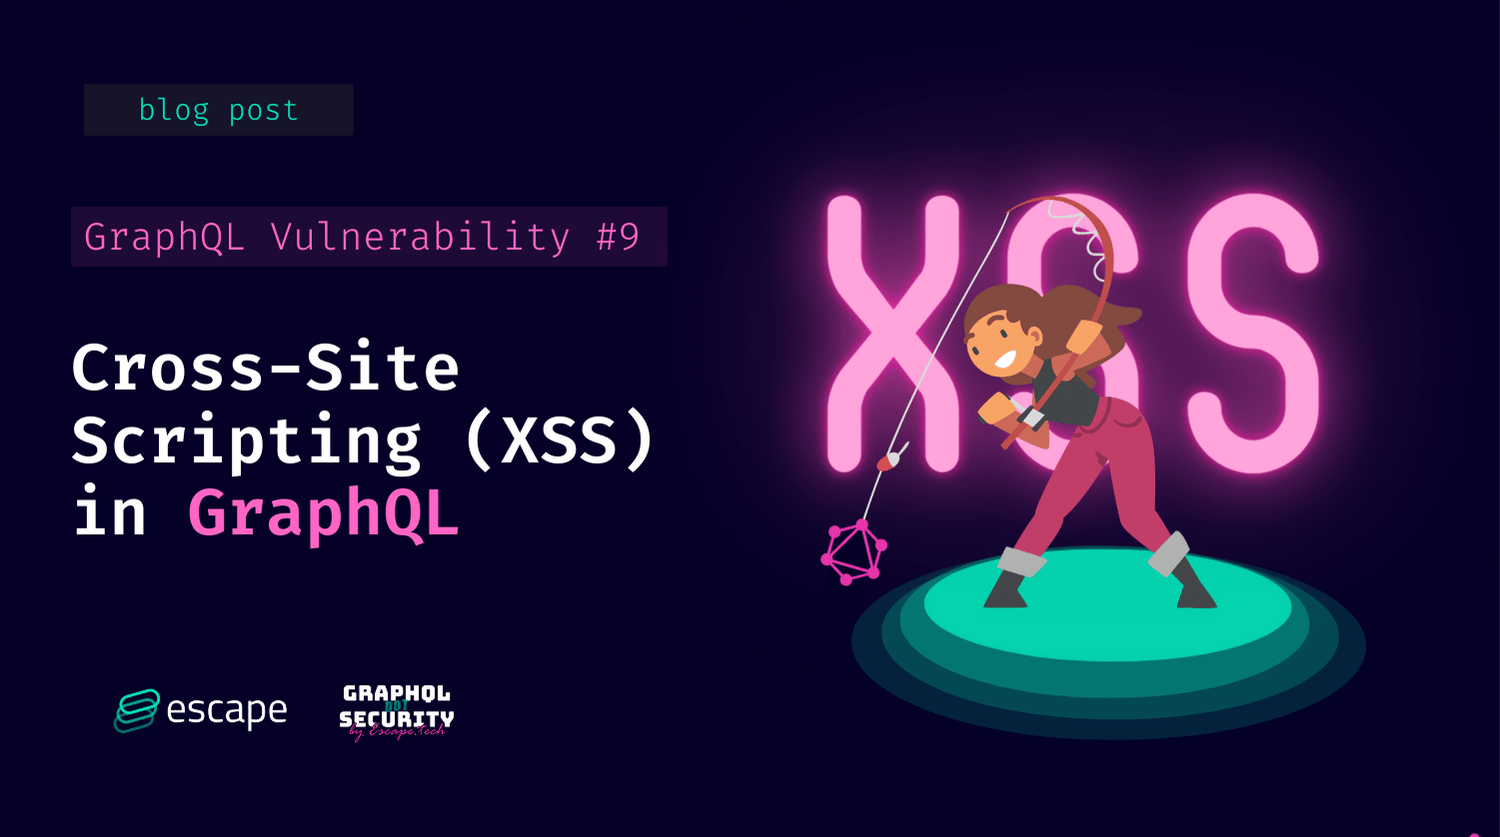 What is Cross-Site Scripting (XSS)? How to Prevent it?